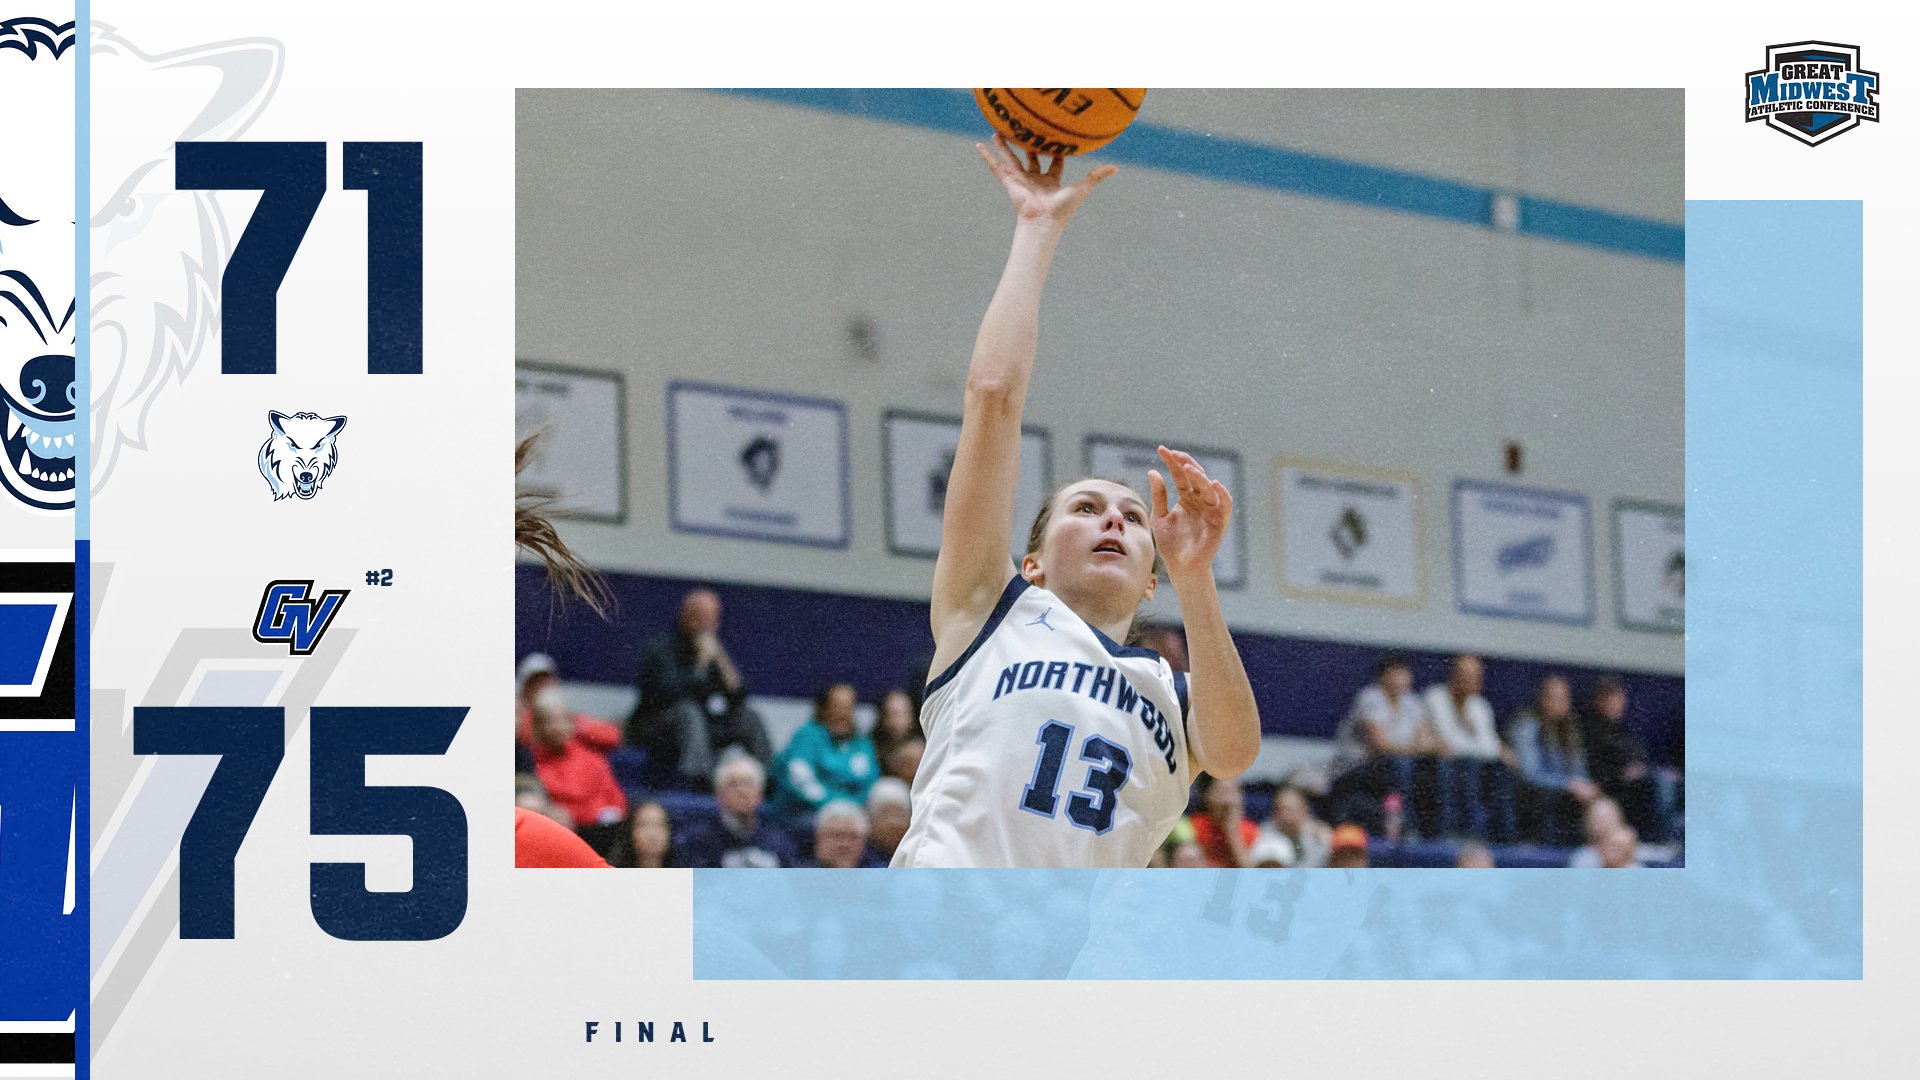 Women's Basketball Loses To #2 Grand Valley State 75-71